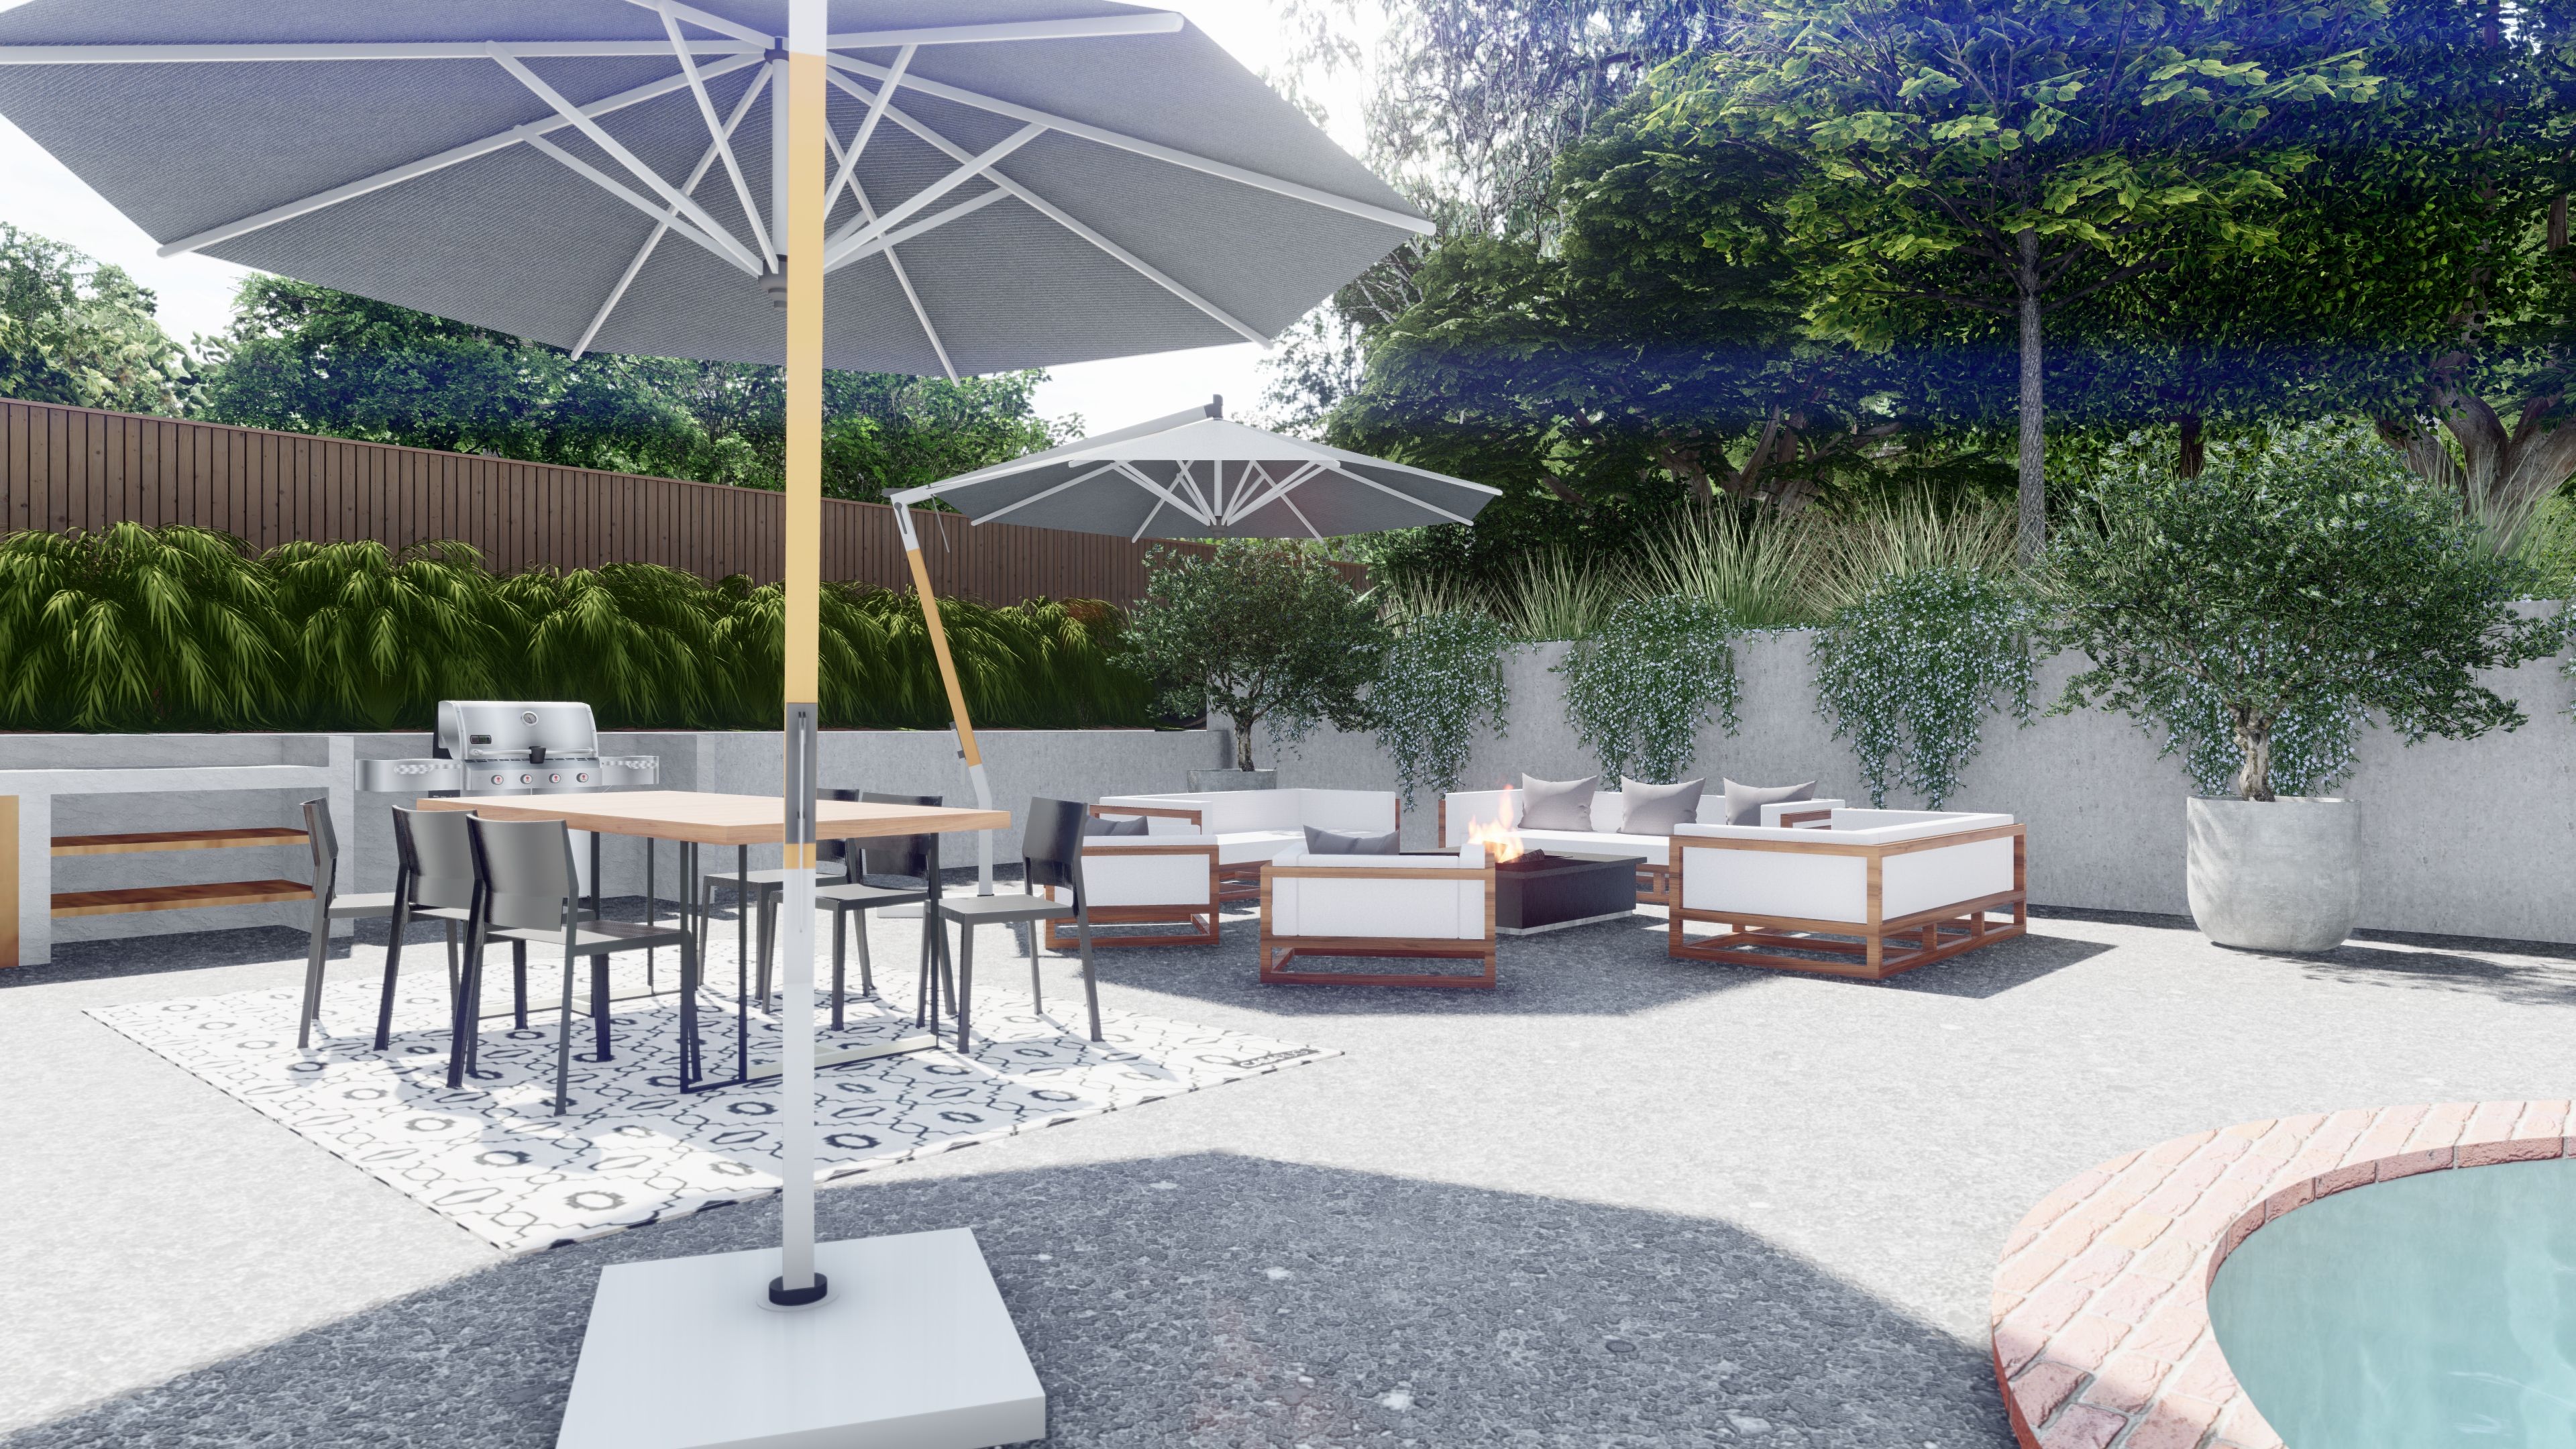 swimming pool next to an outdoor dining table, outdoor lounge furniture and a cantilever umbrella for shade